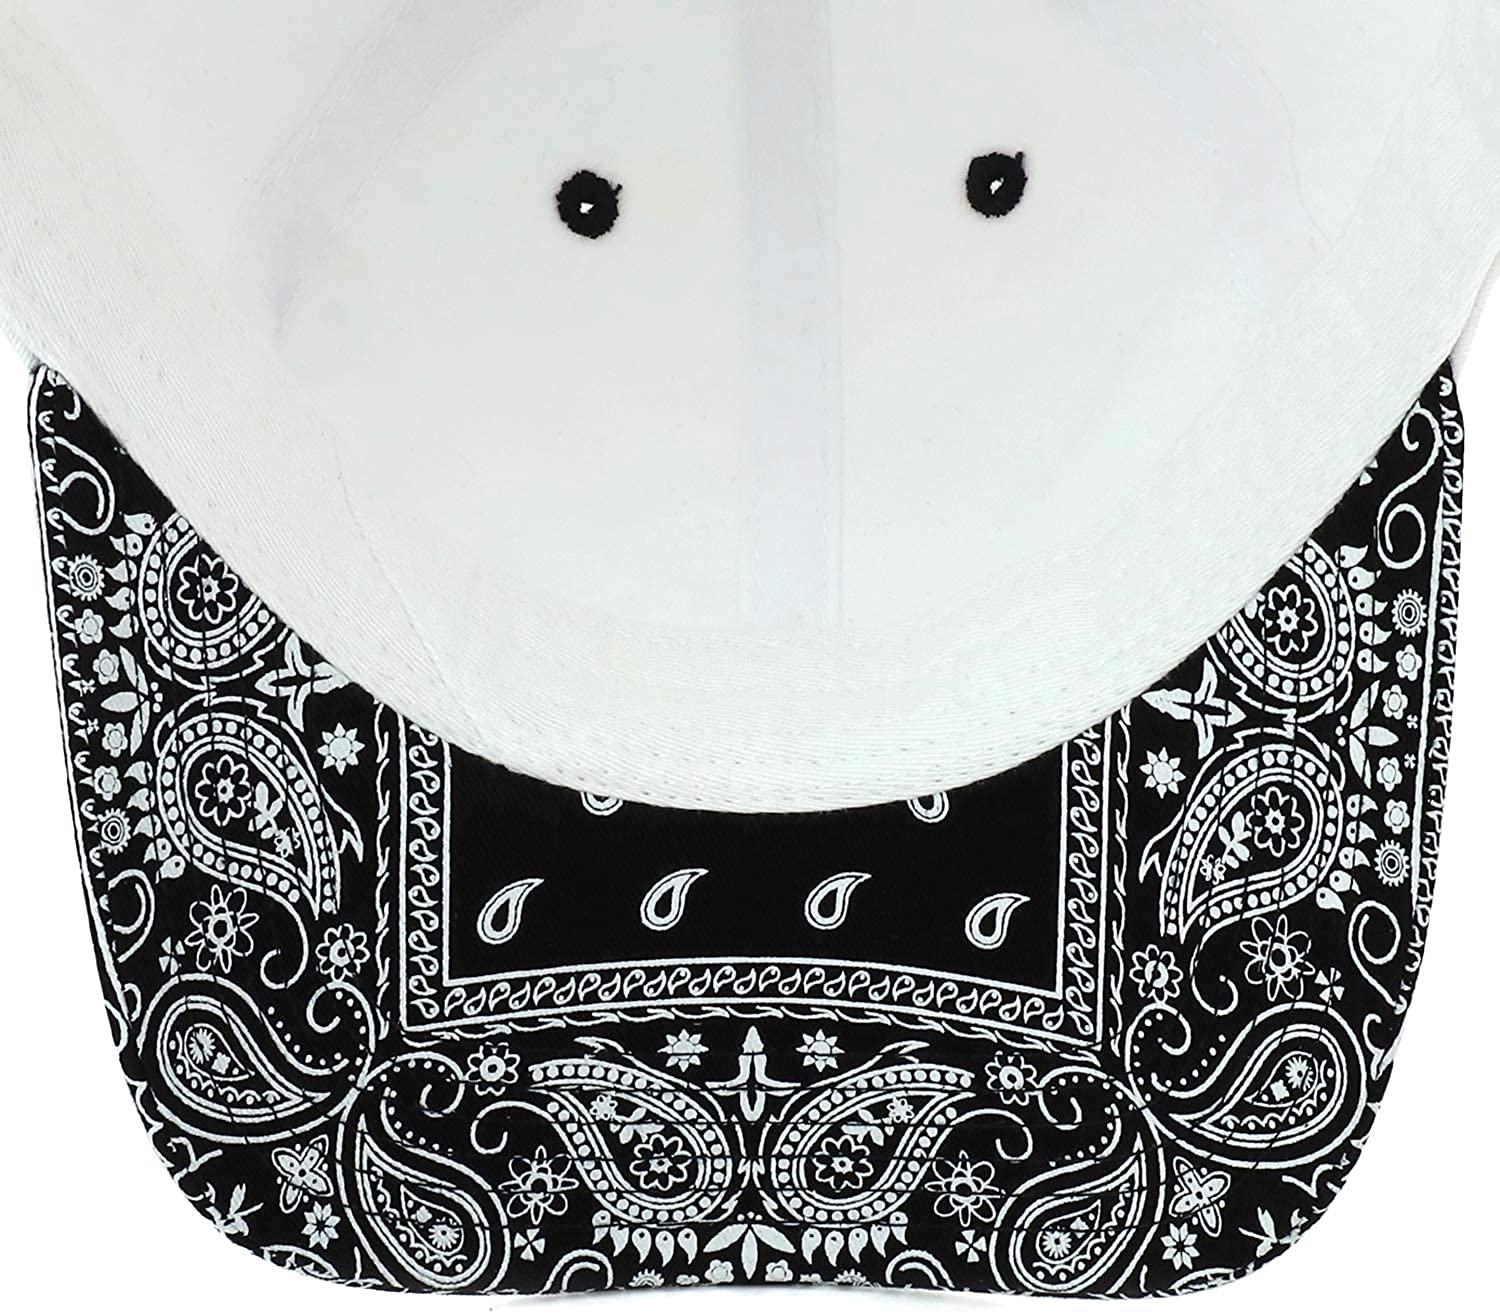 Armycrew Paisley Printed Bill Unstructured Cotton Baseball Cap